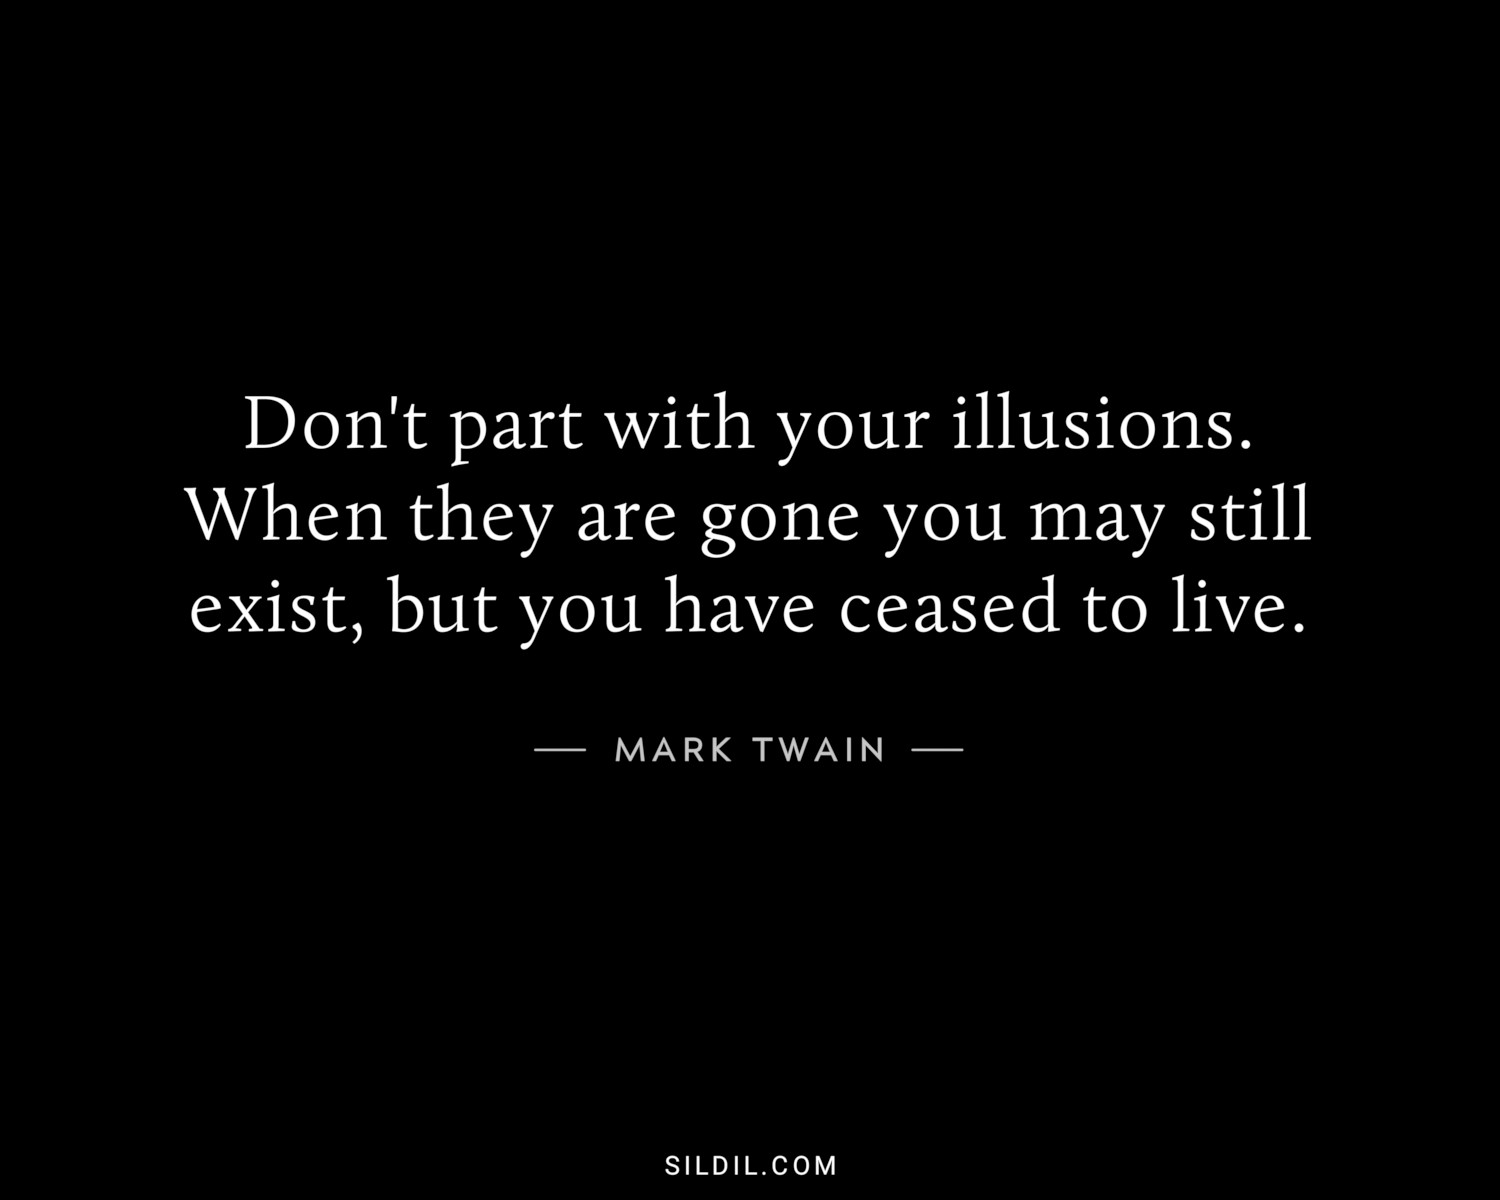 Don't part with your illusions. When they are gone you may still exist, but you have ceased to live.